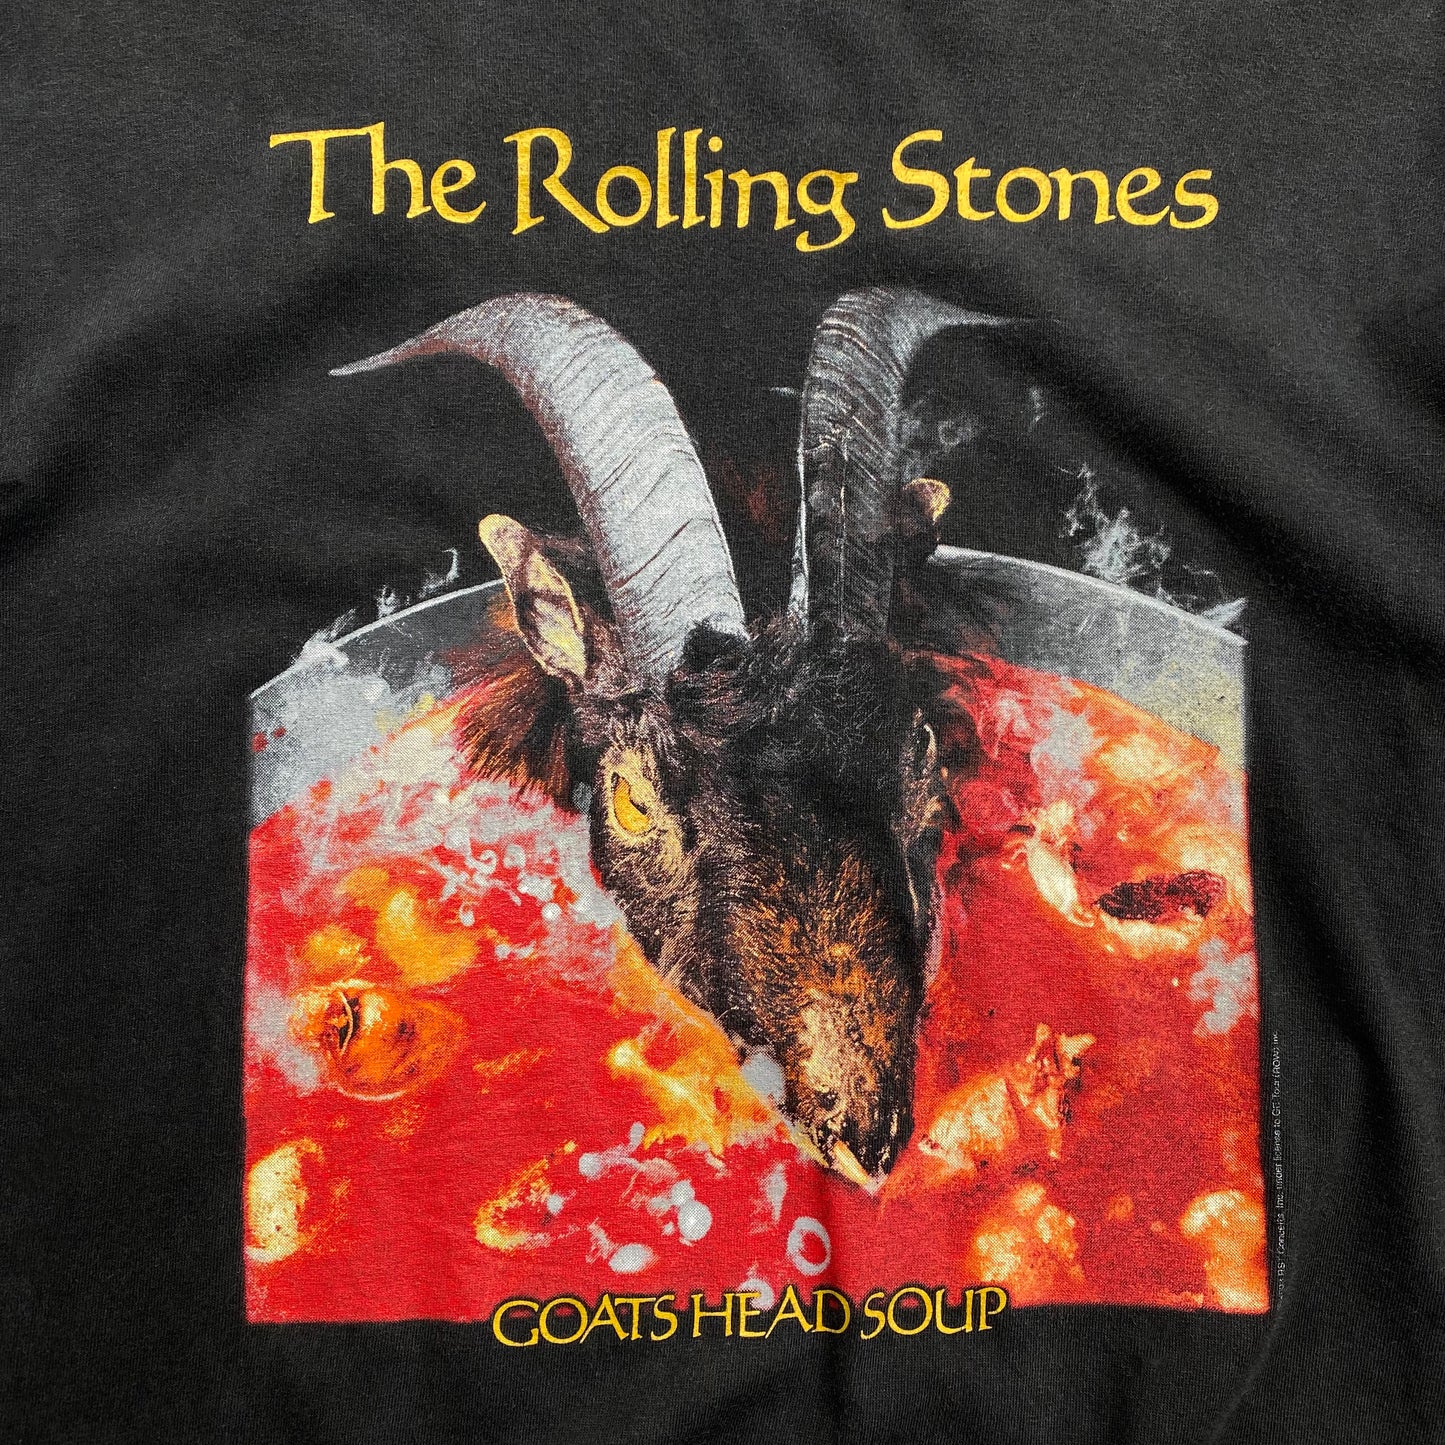 00's THE ROLLING STONES "GOATS HEAD SOUP" T-SHIRT